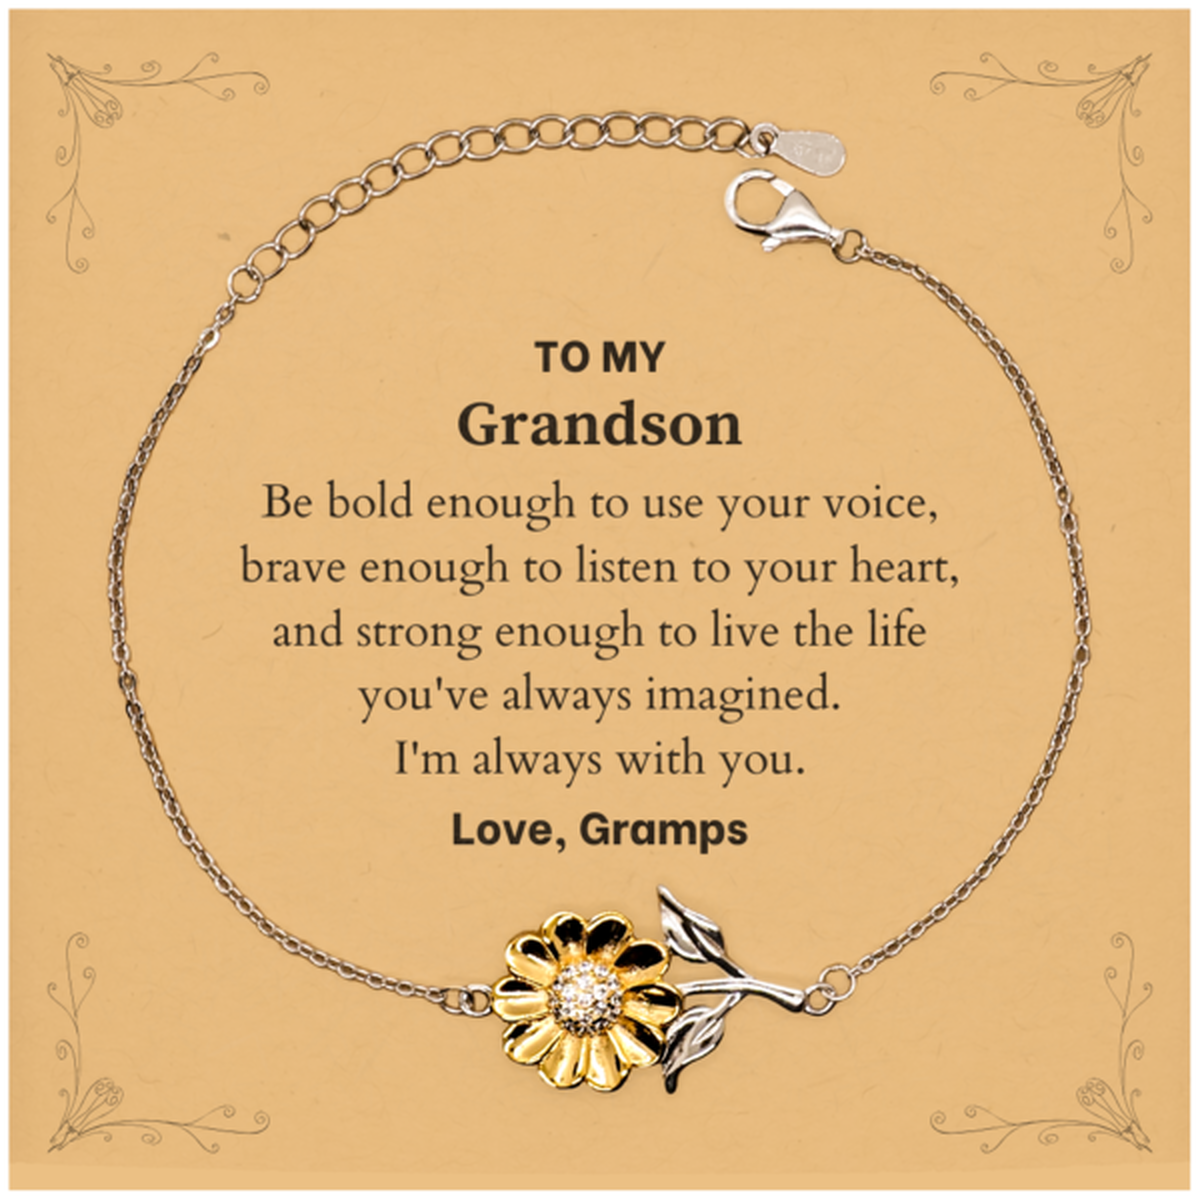 Keepsake Grandson Sunflower Bracelet Gift Idea Graduation Christmas Birthday Grandson from Gramps, Grandson Be bold enough to use your voice, brave enough to listen to your heart. Love, Gramps